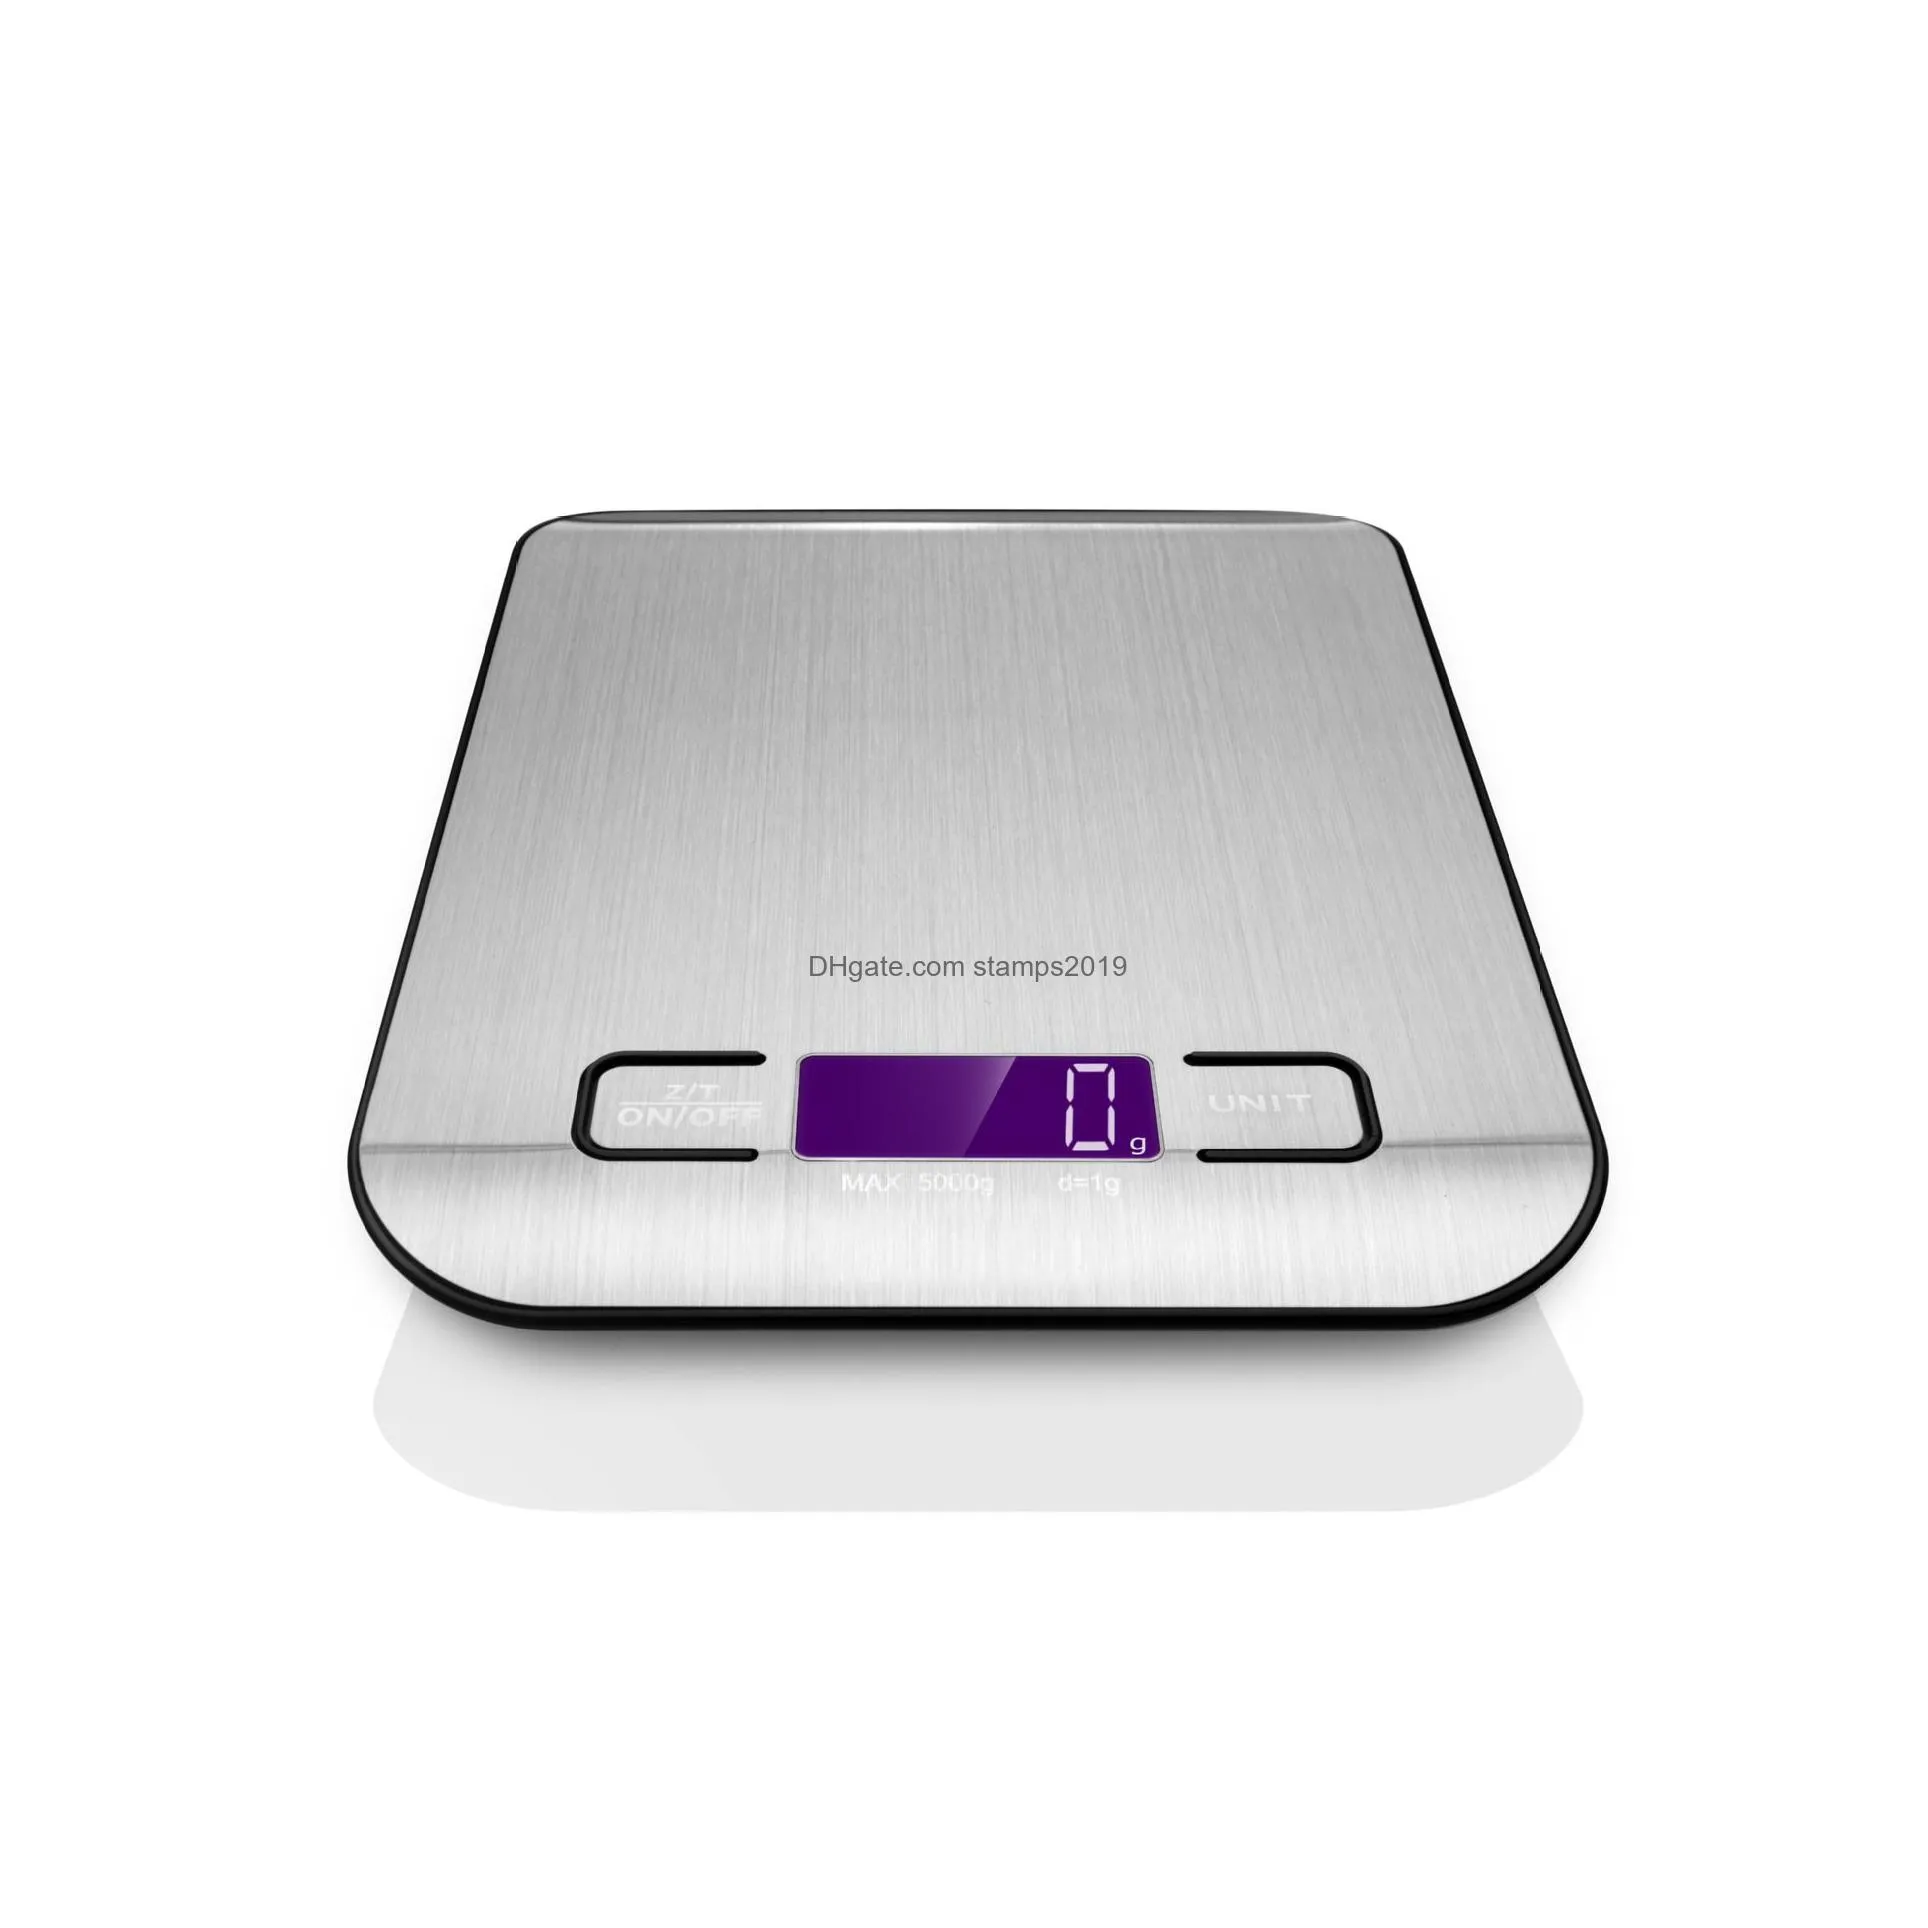 5000g/1g led electronic digital kitchen scales multifunction food scale stainless steel lcd precision jewelry scale weight balance